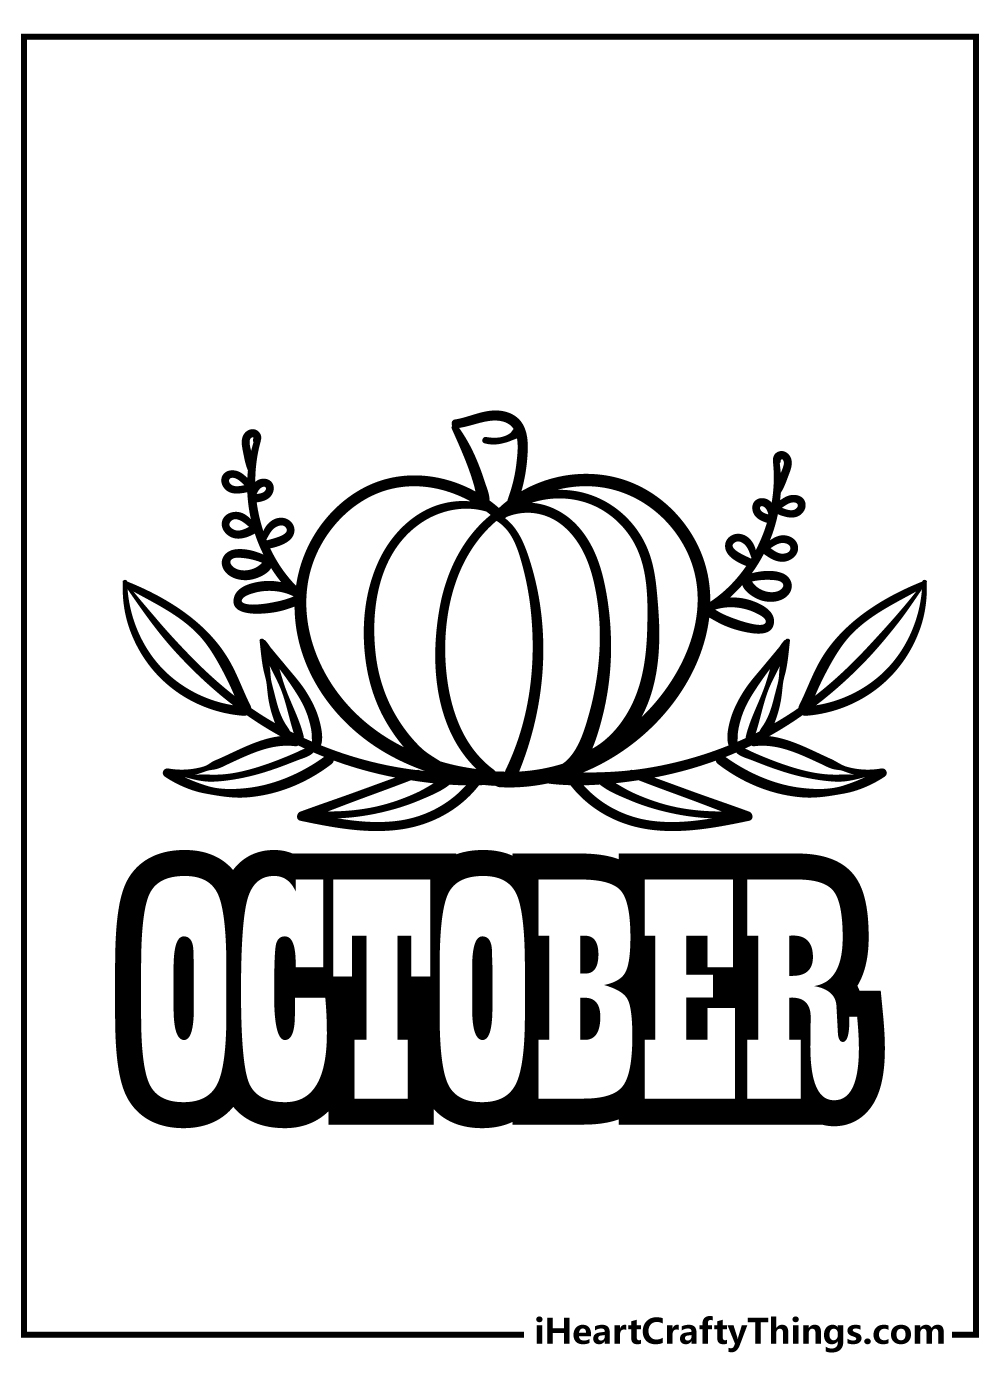 October Coloring Pages for kids free download